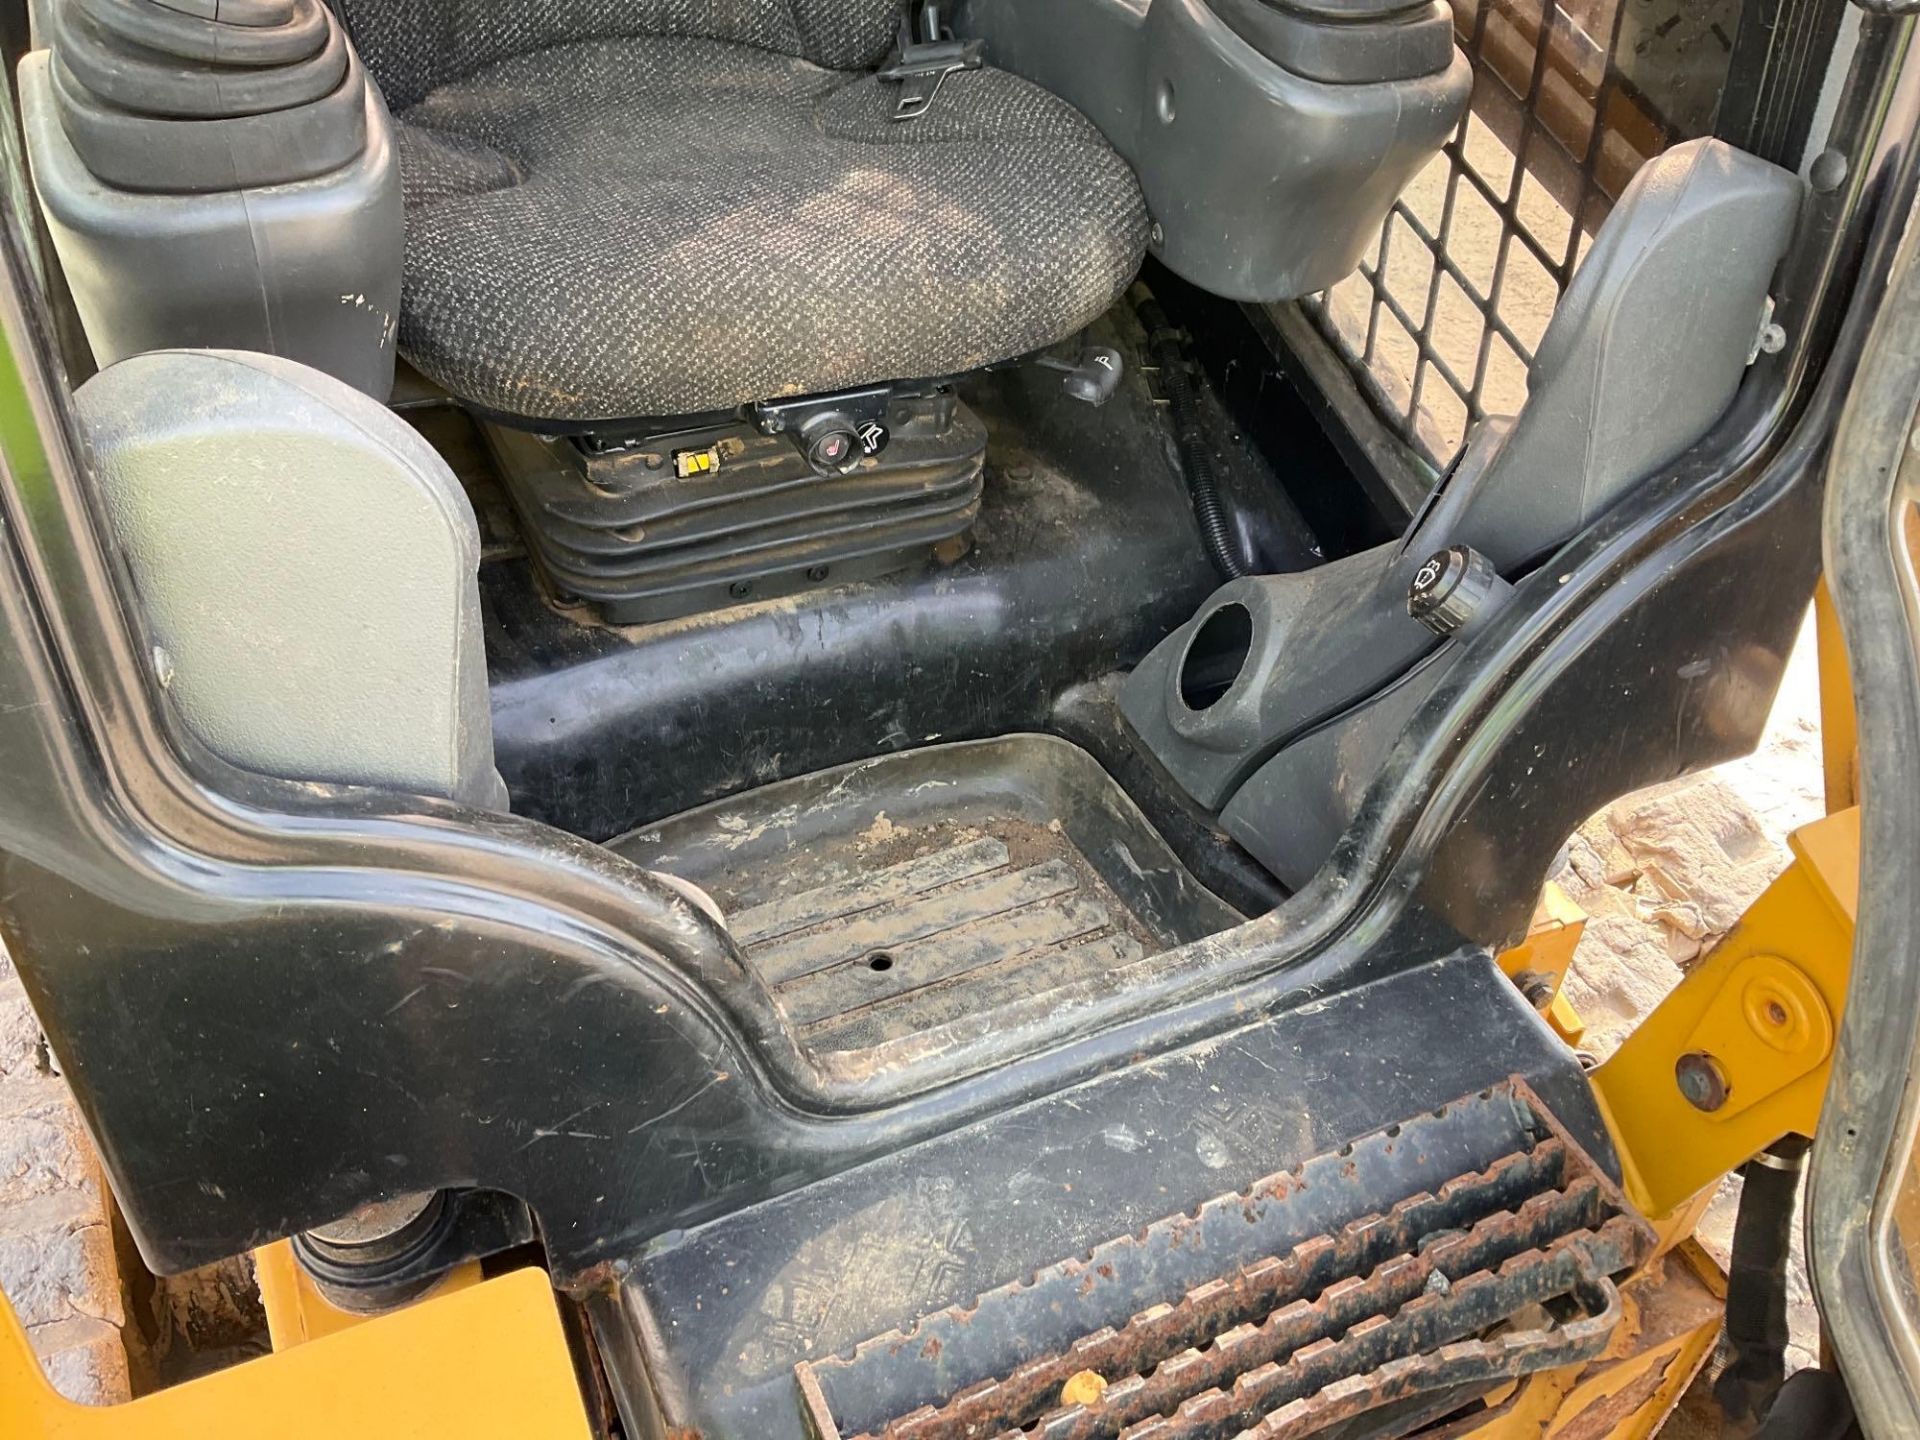 2018 Caterpillar 259D Compact Track Loader Skid Steer - Image 10 of 32